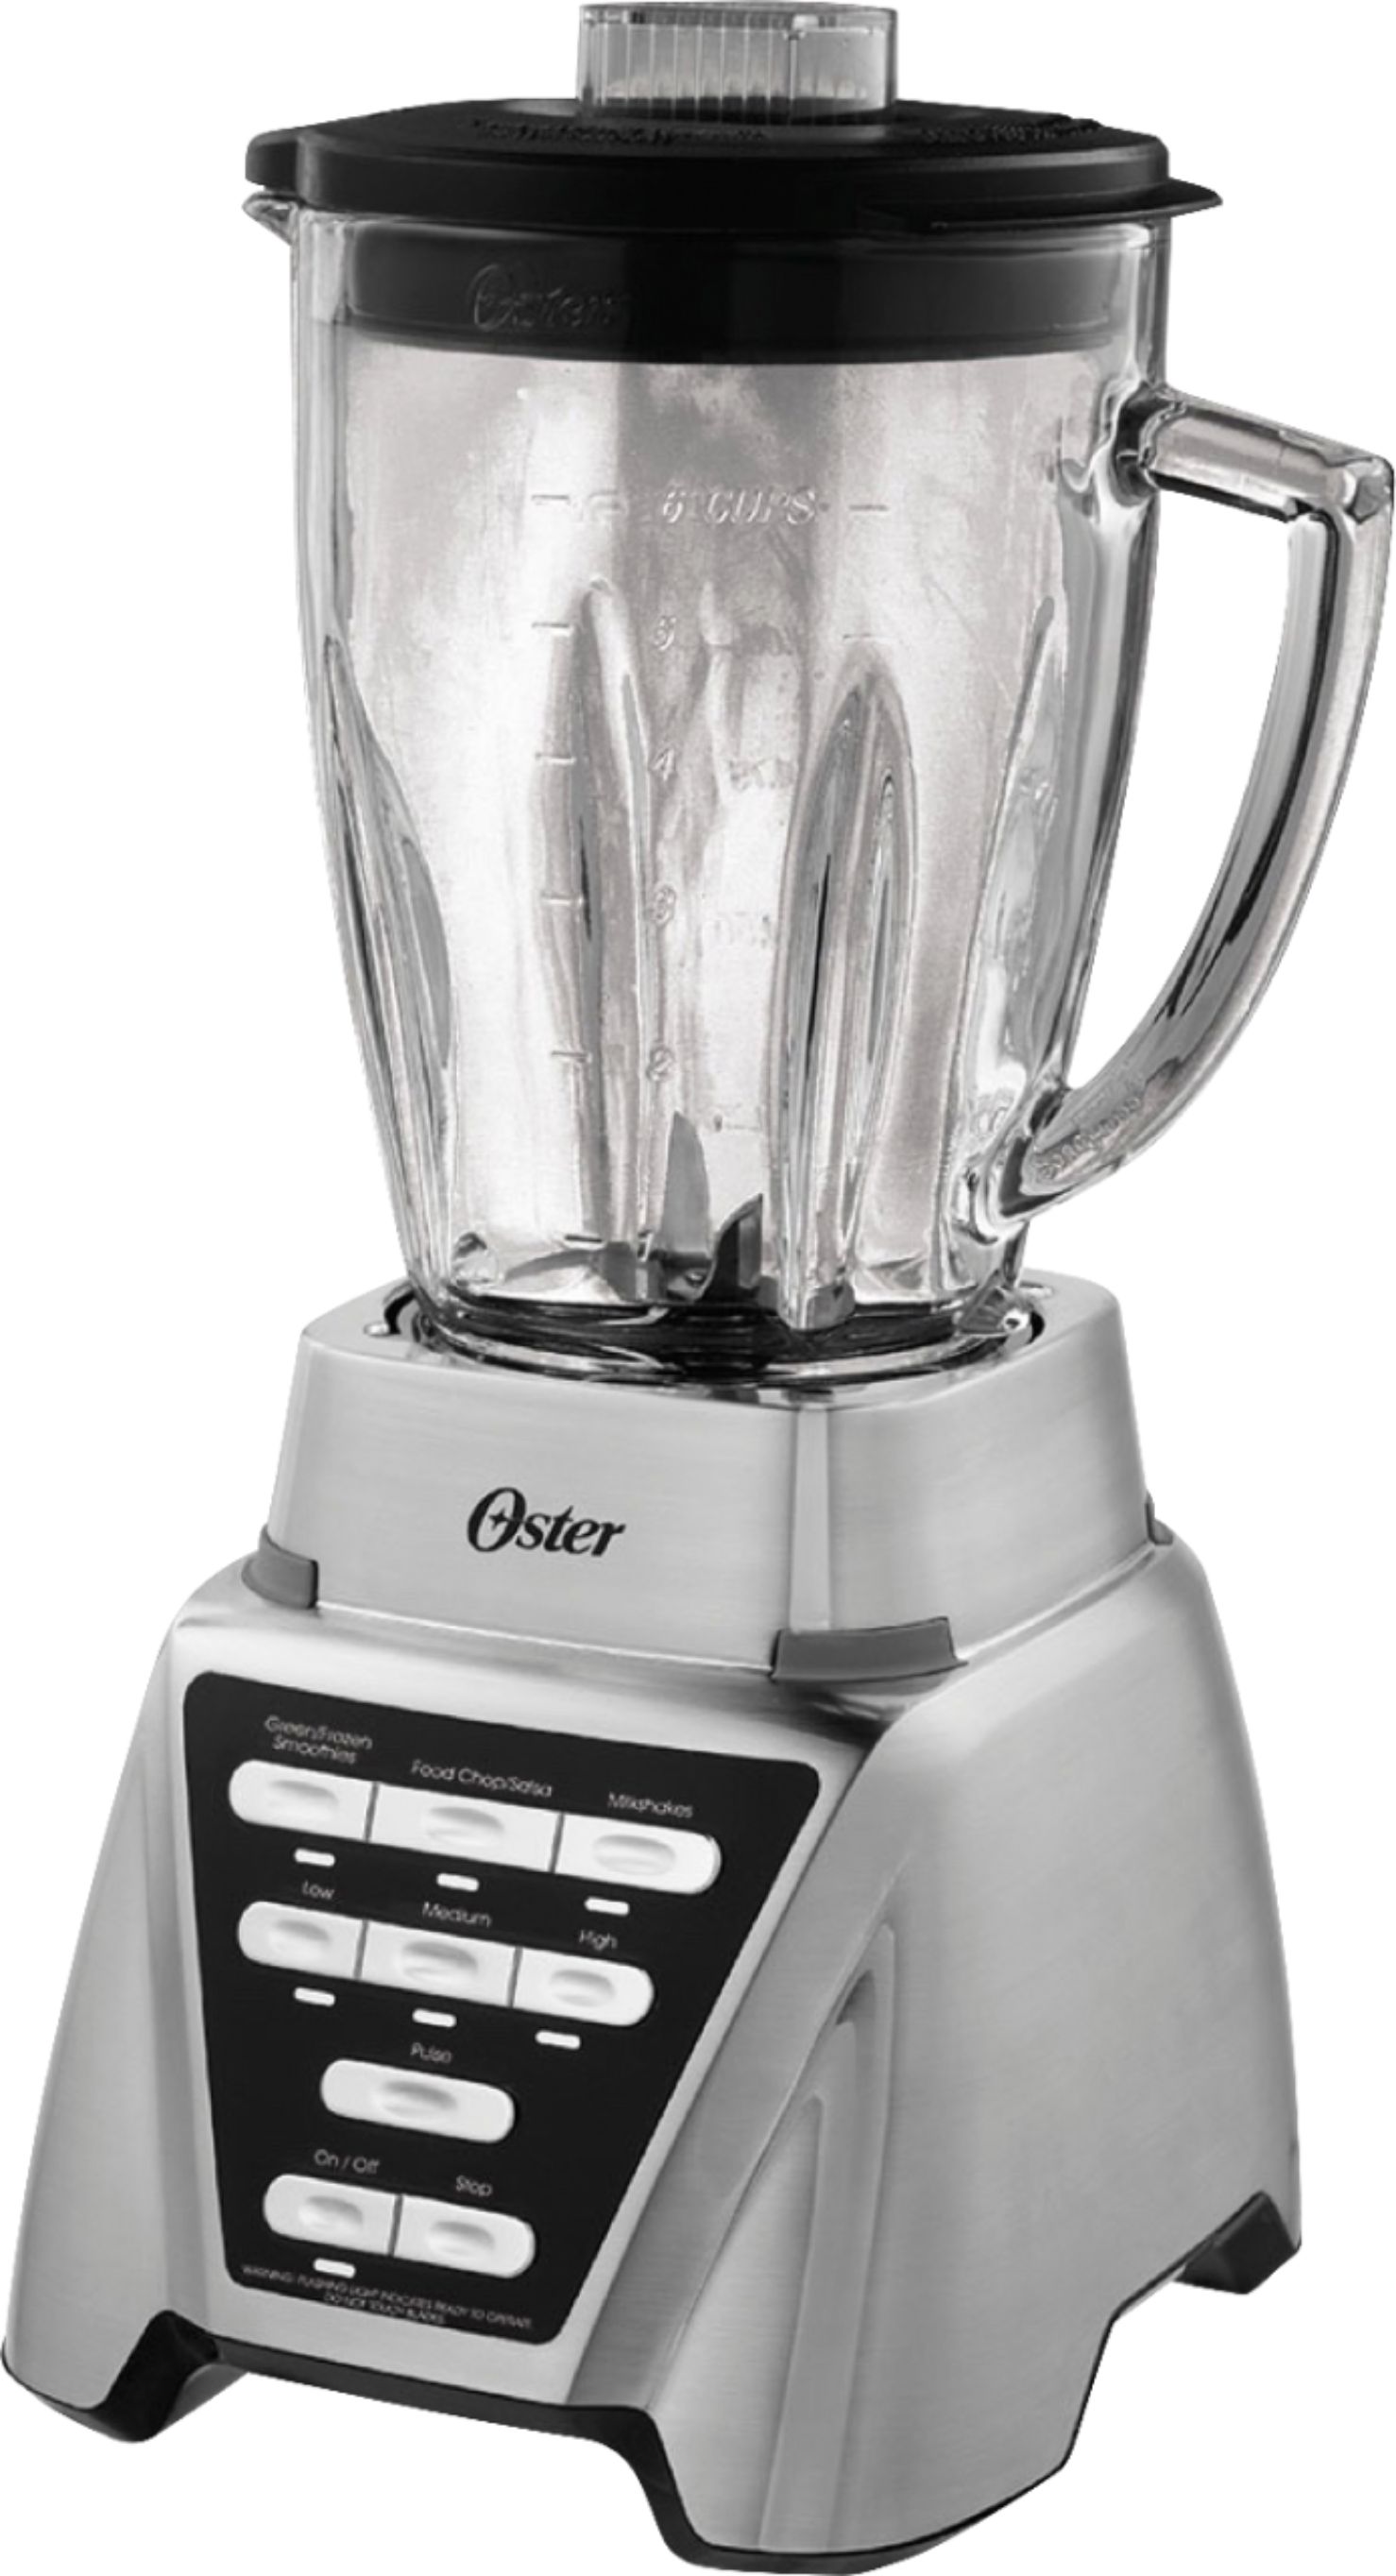 Oster Blender Pro 1200 Review｜Smooth Blends Every Time 